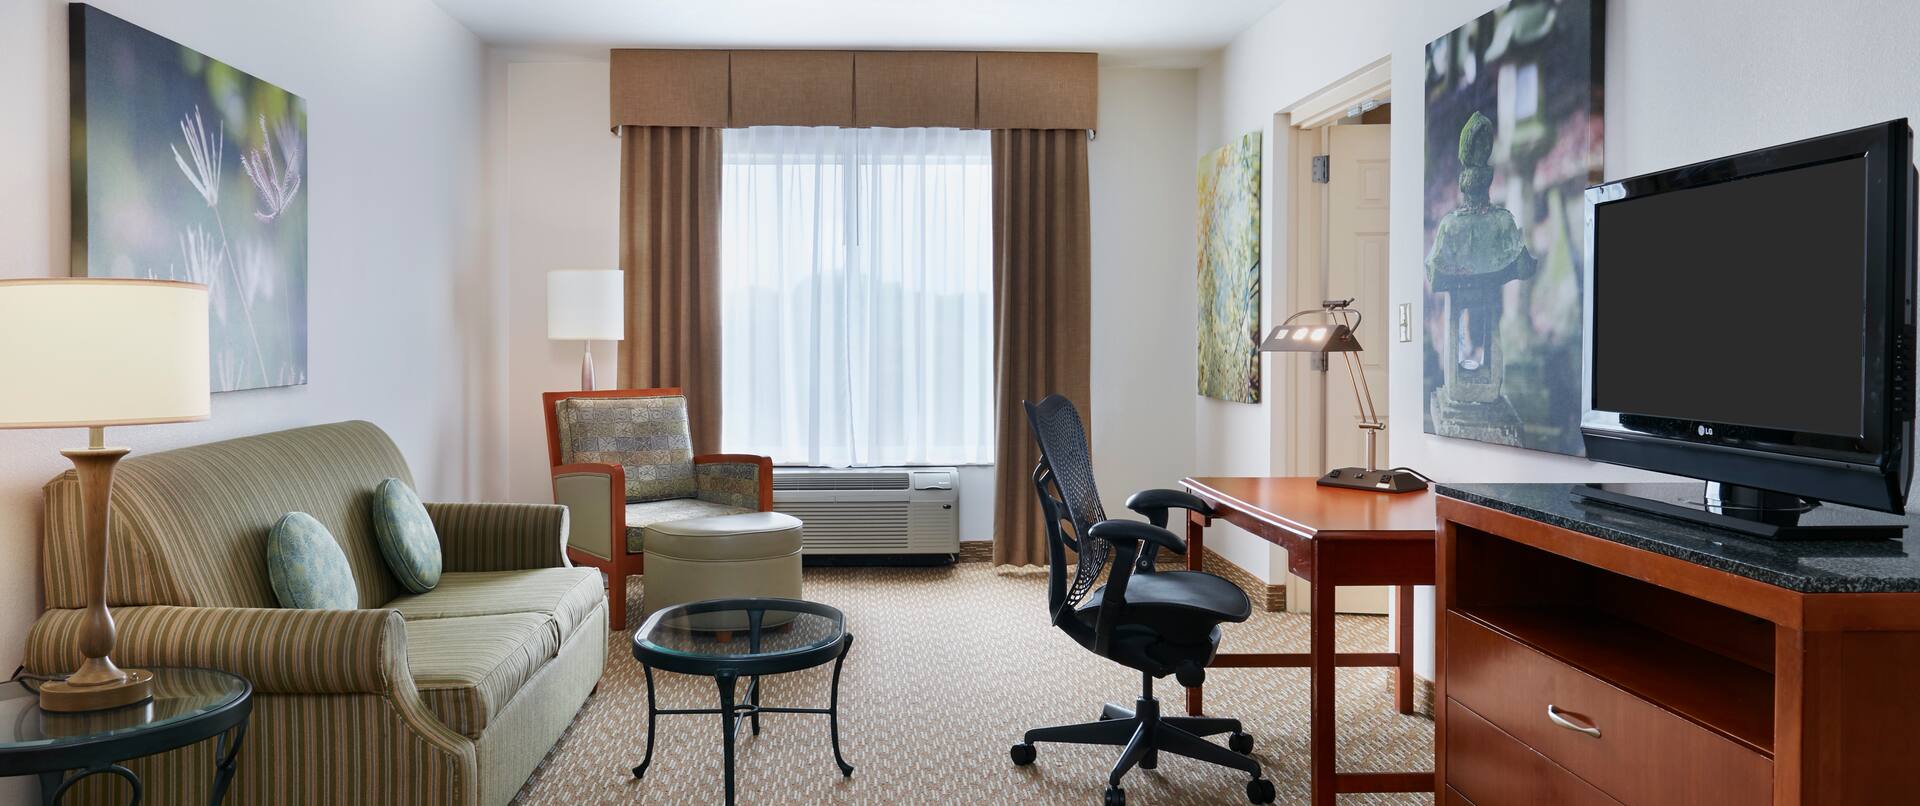 Accessible King Guestroom Suite with Lounge Area, Work Desk, and Room Technology